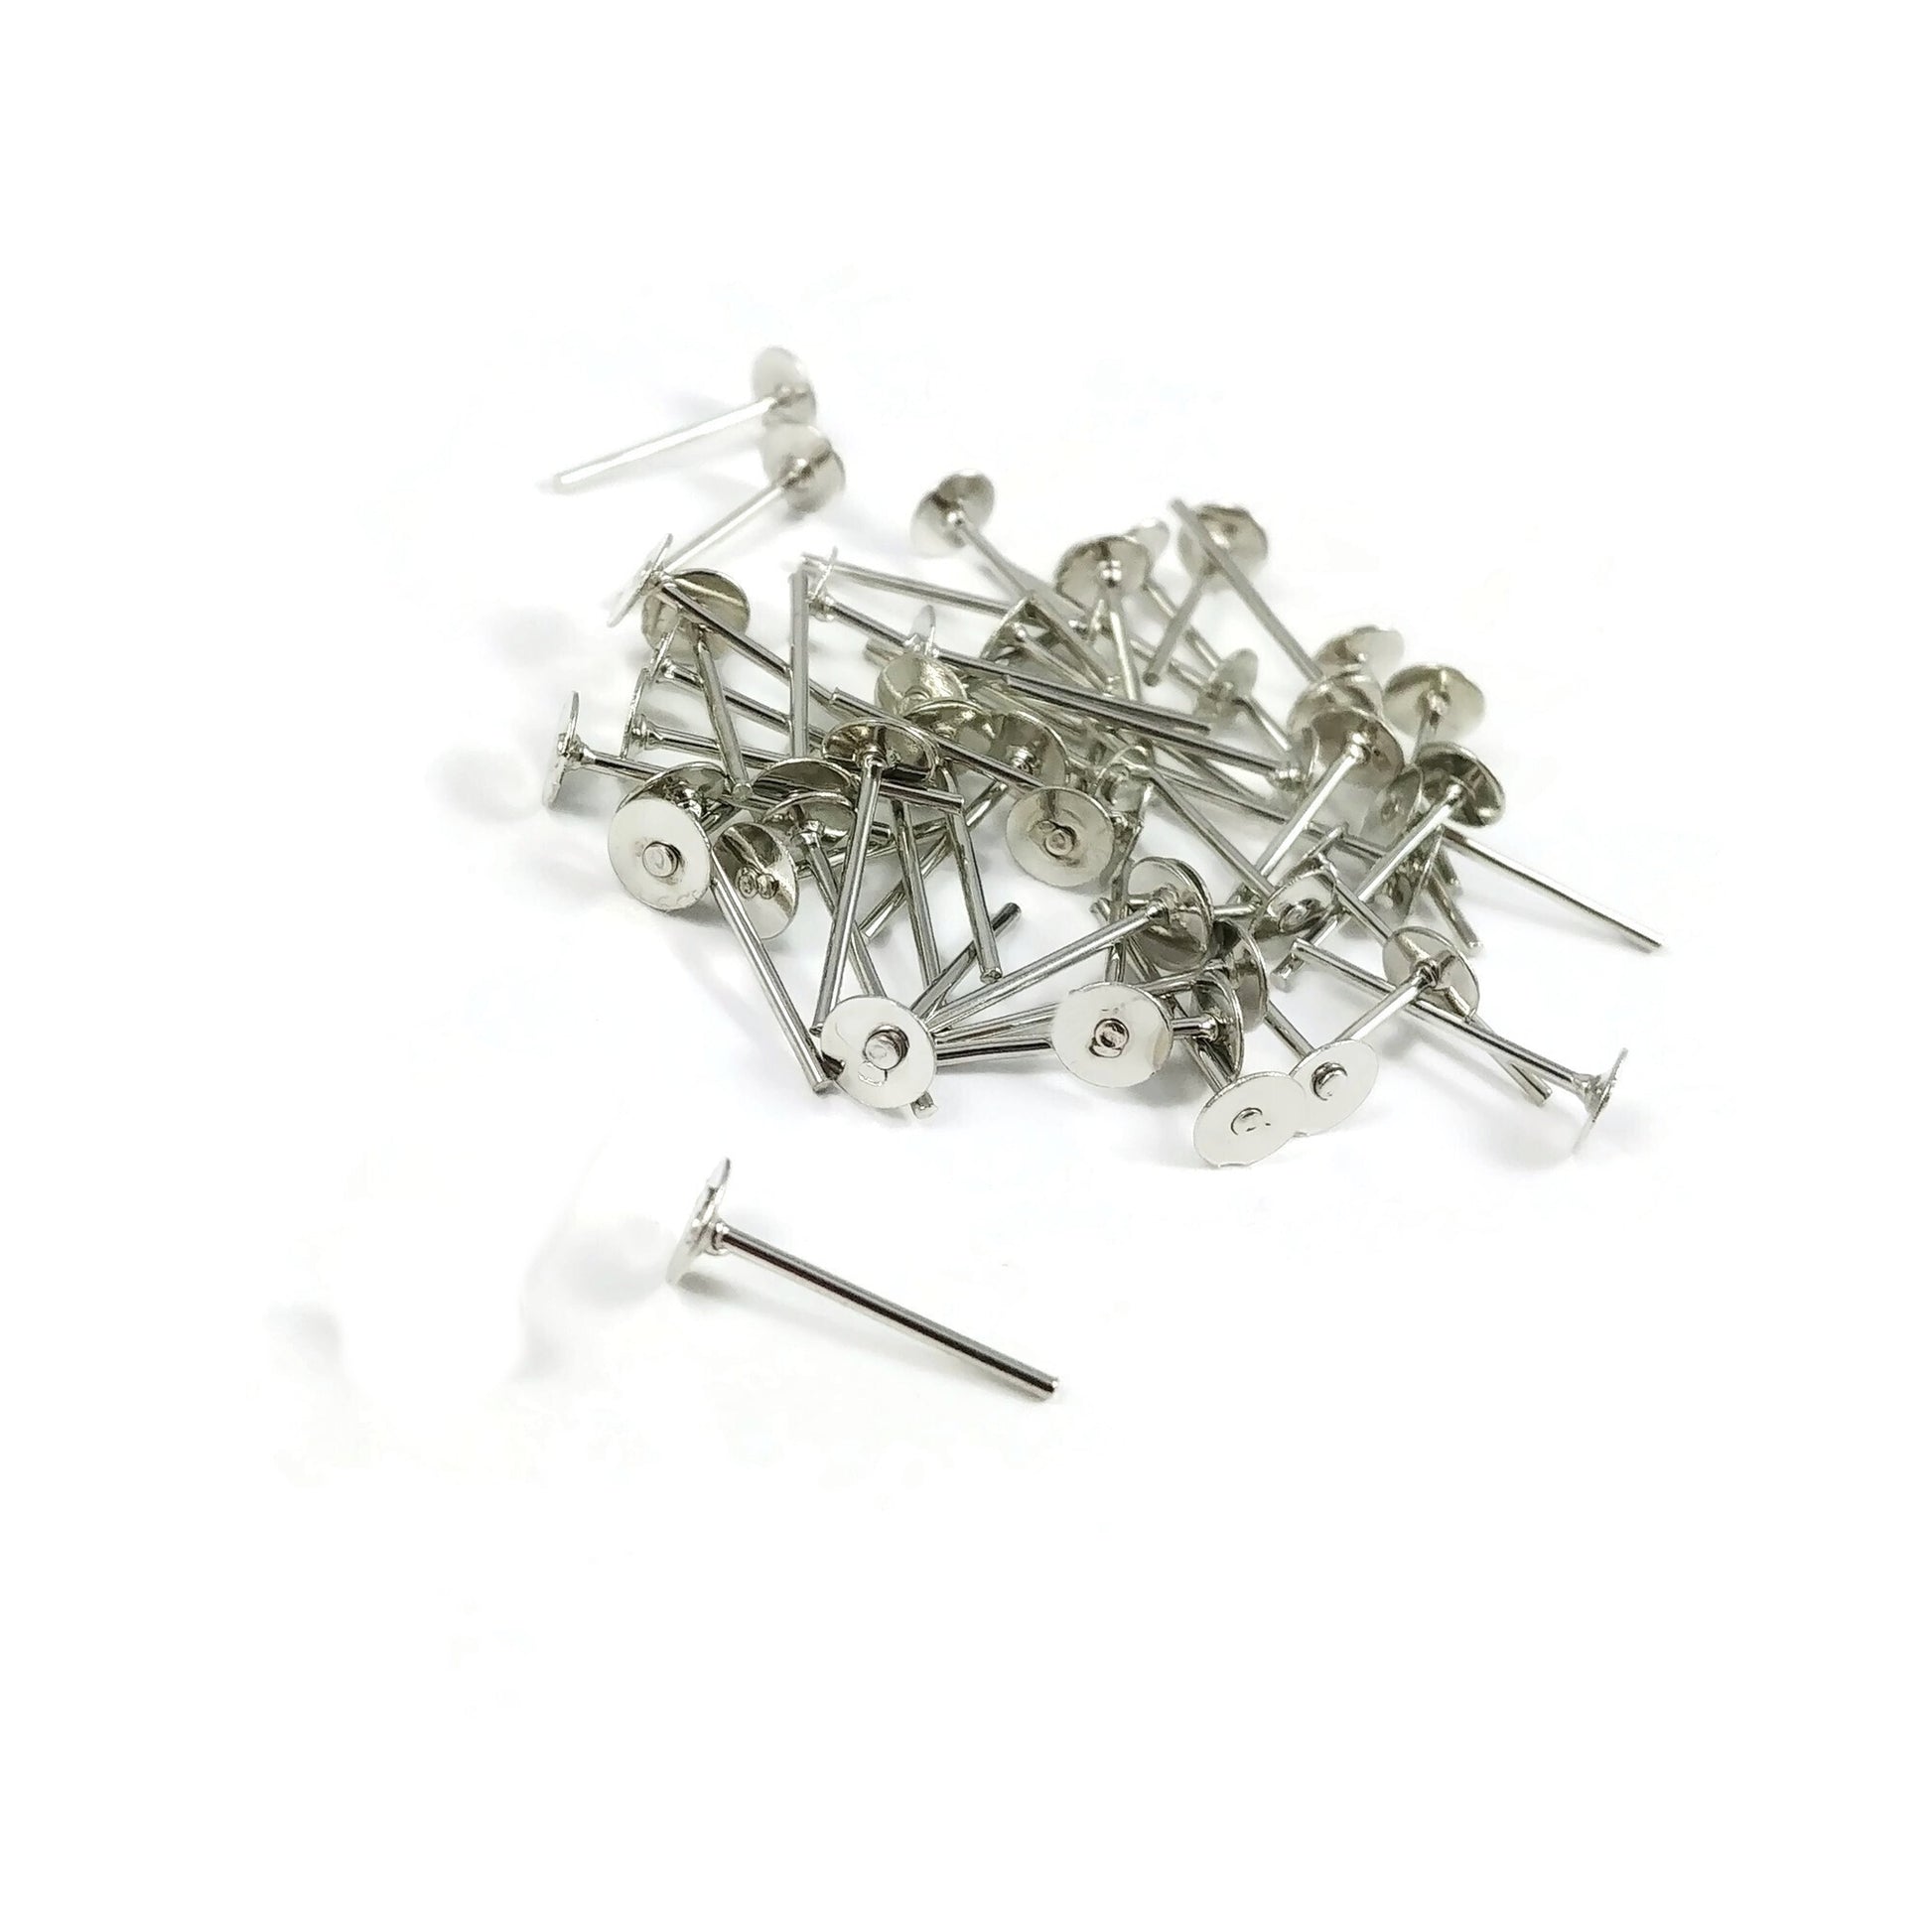 Earring stud posts, 4mm pad, silver. Nickel free, lead free and cadmium free